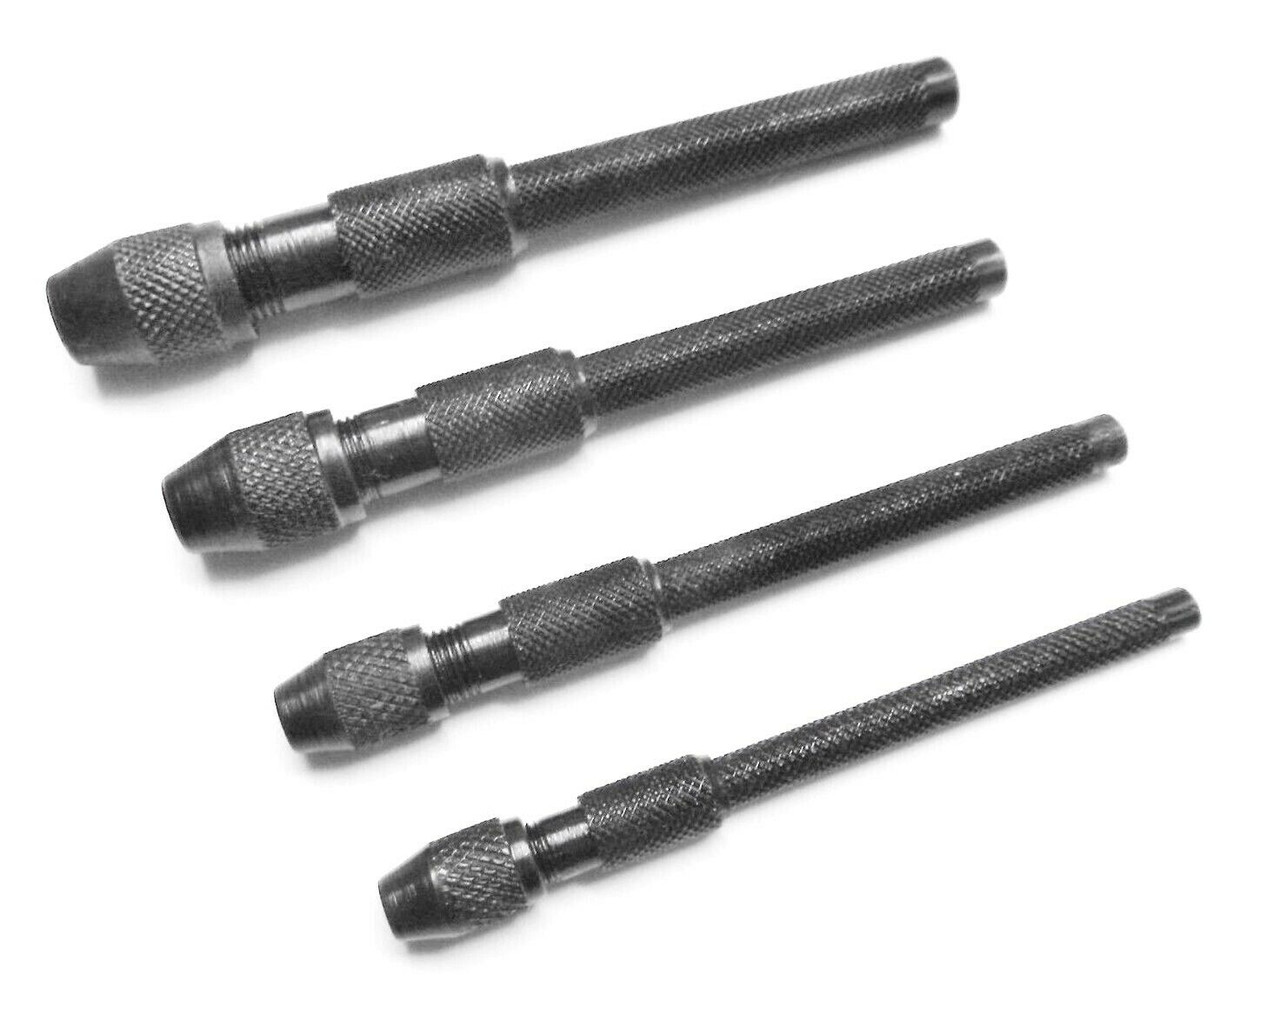 4 Piece Pin Vise Set Handheld 4 Sizes Chucks Drilling Vice Jewelry Hobby Crafts